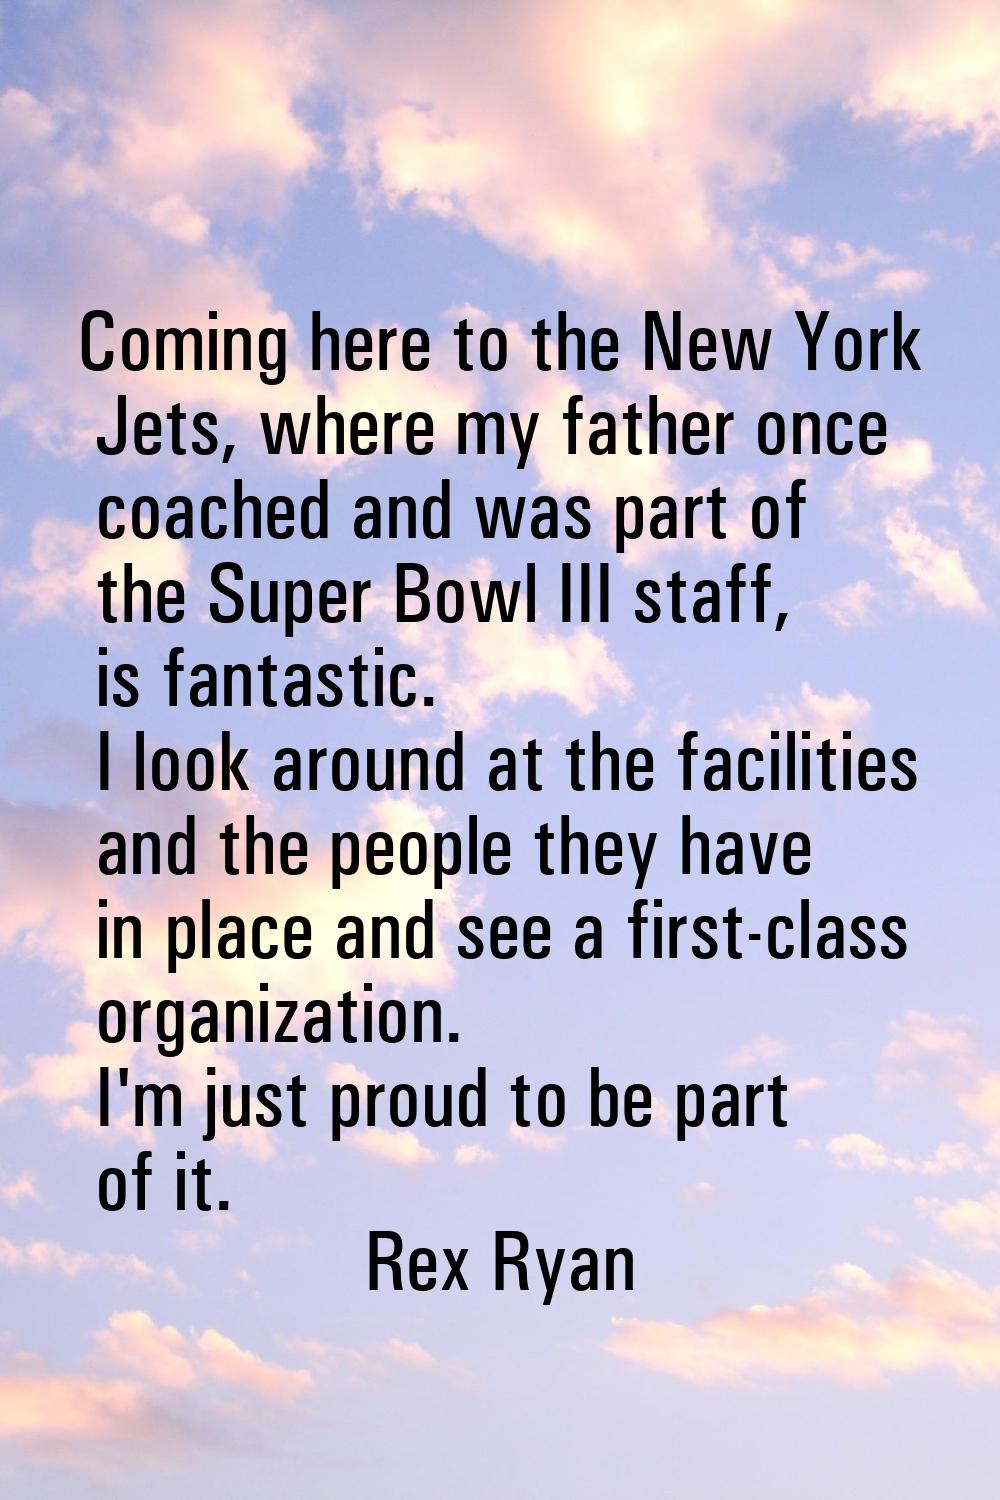 Coming here to the New York Jets, where my father once coached and was part of the Super Bowl III s